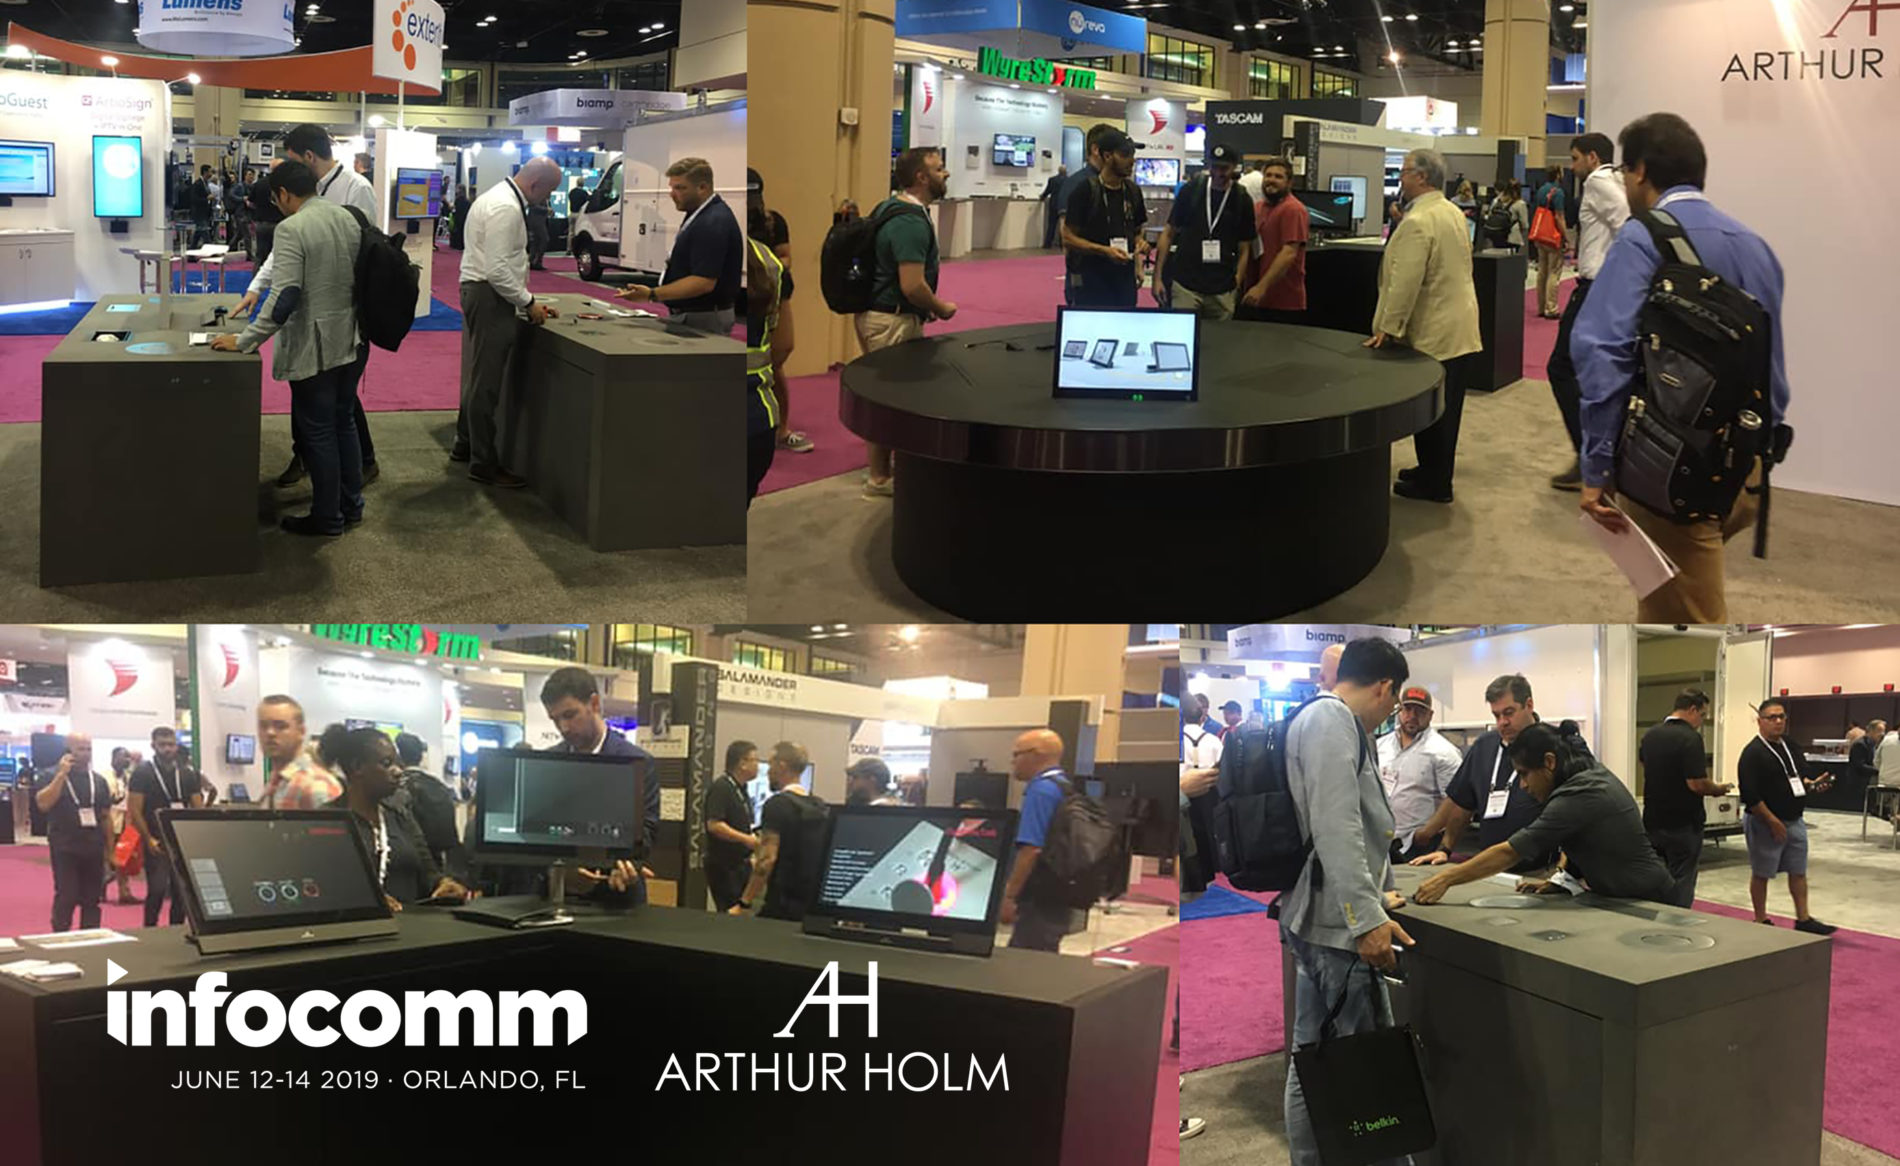 Thank you for visiting Arthur Holm at InfoComm 2019!